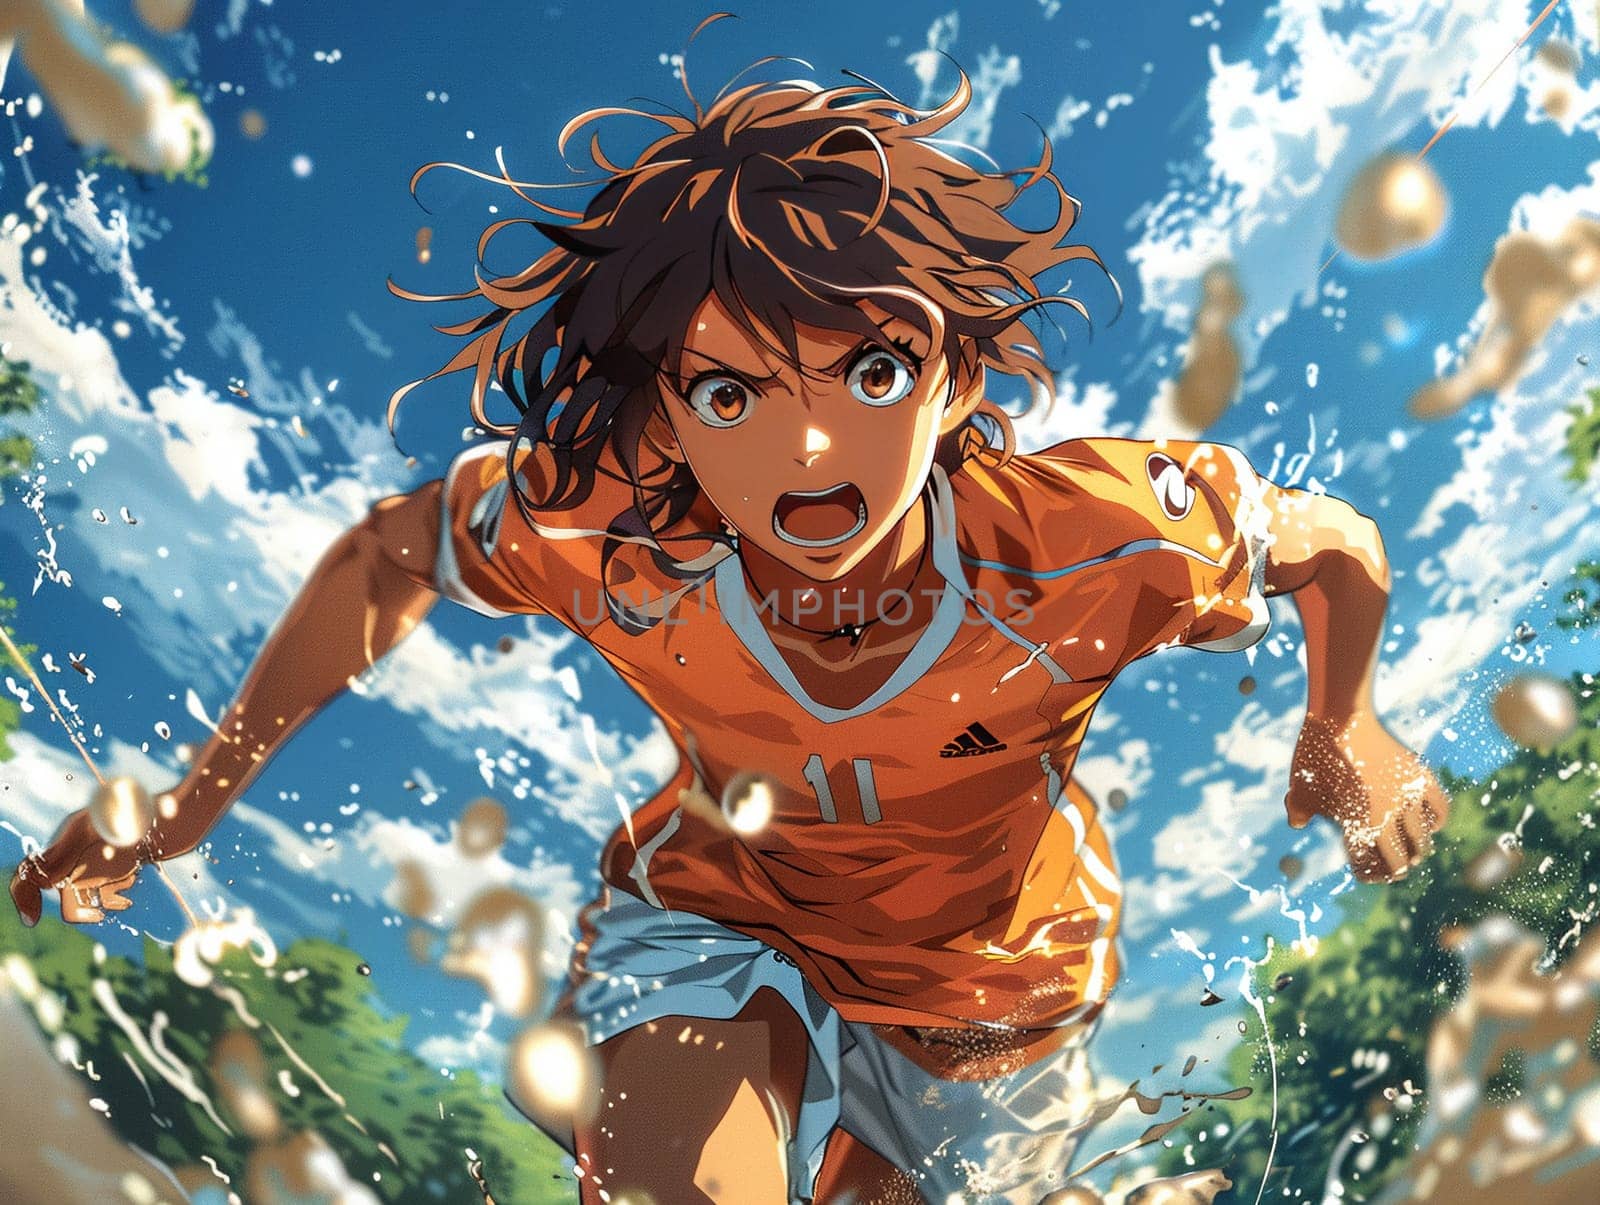 Sport-themed anime characters by Benzoix